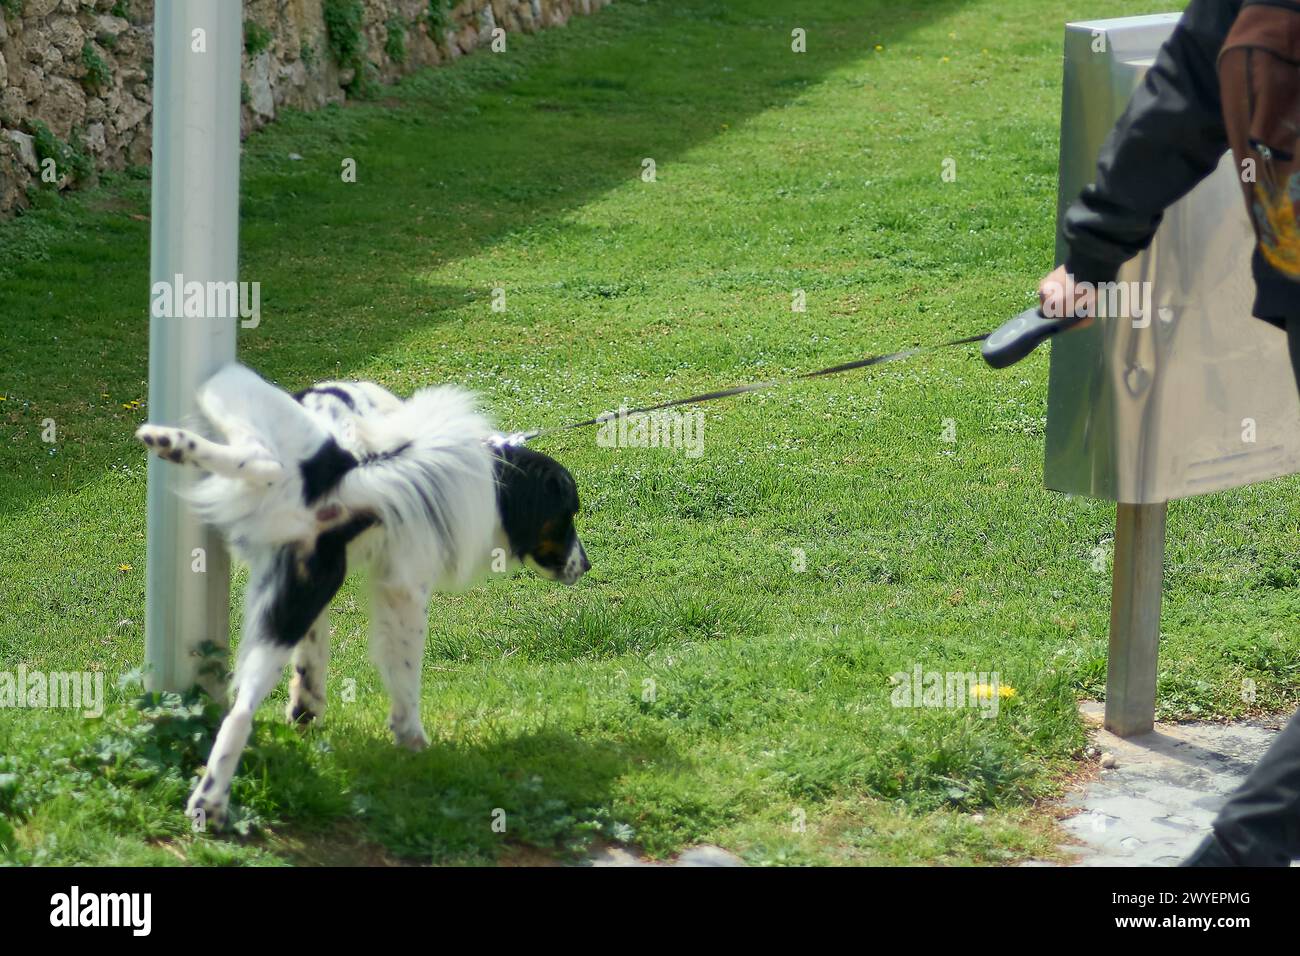 A black and white dog is captured mid-leap, pulling away from a person holding its leash in a grassy outdoor area, showcasing energy and movement. Stock Photo